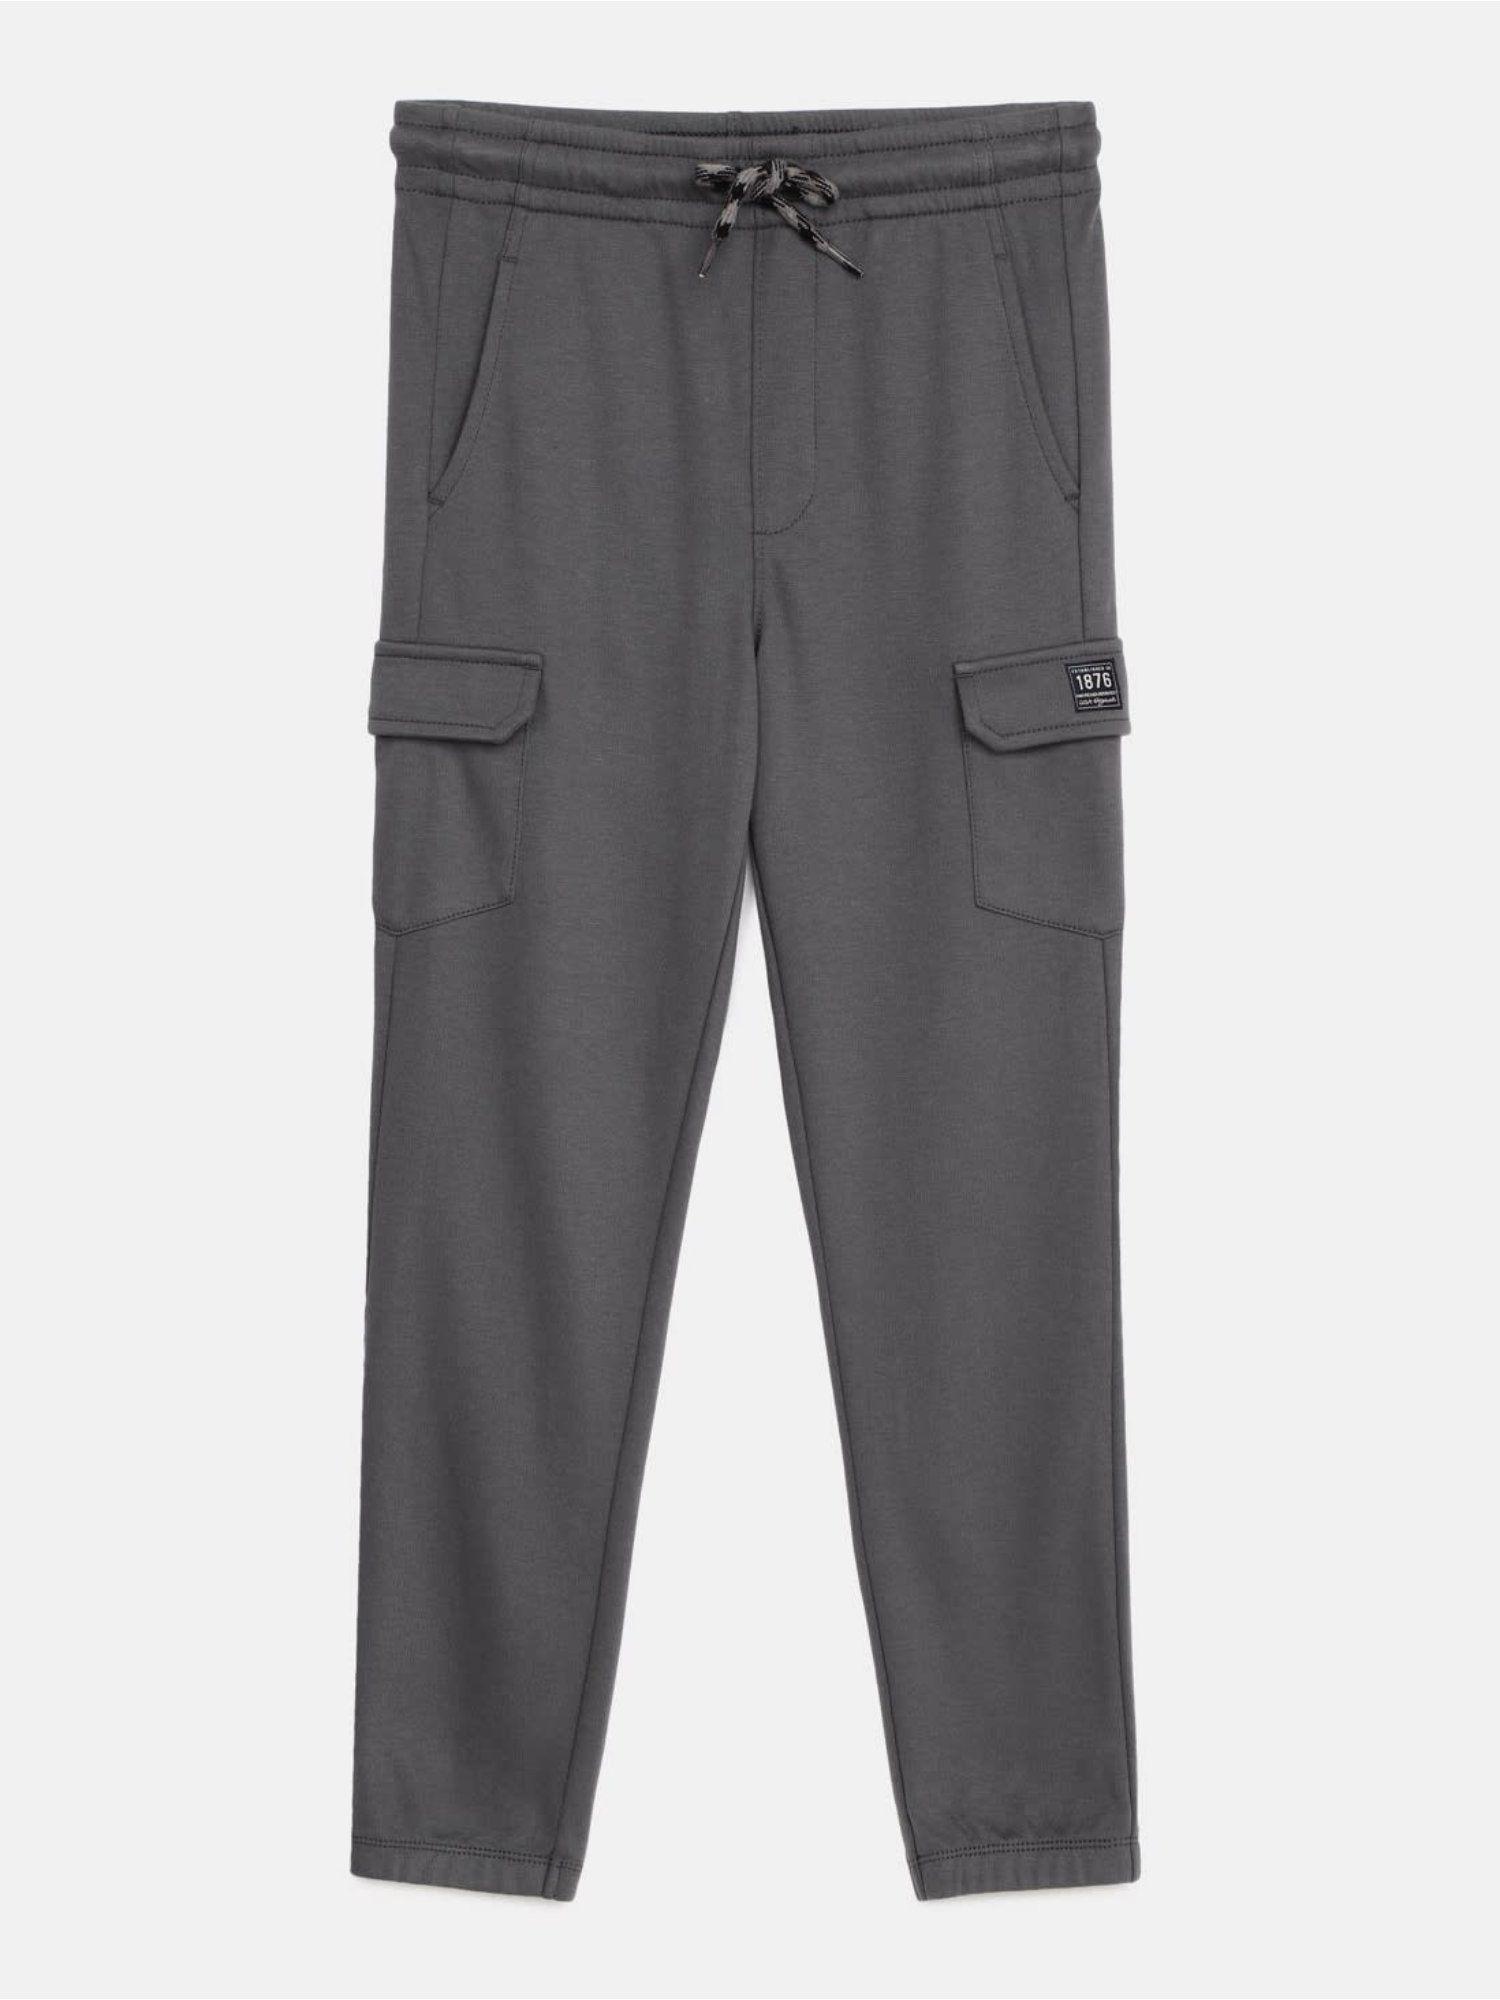 ub67 cotton rich cargo pants for boys with side pockets & drawstring grey